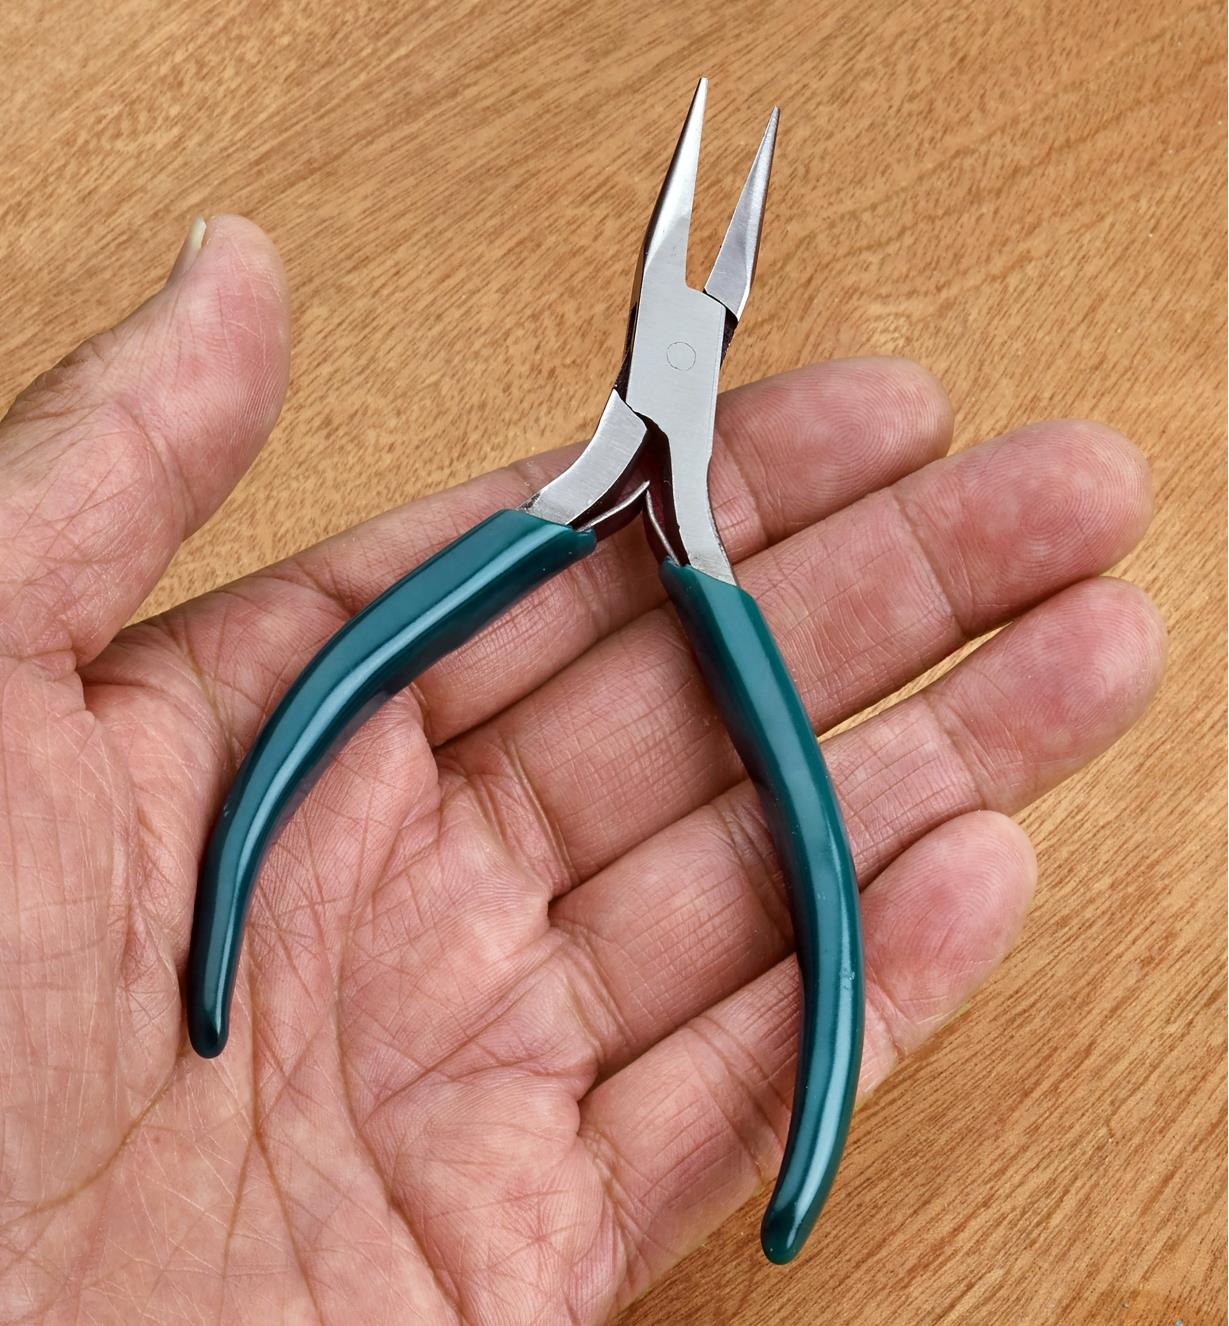 Long-nose pliers on the palm of a hand